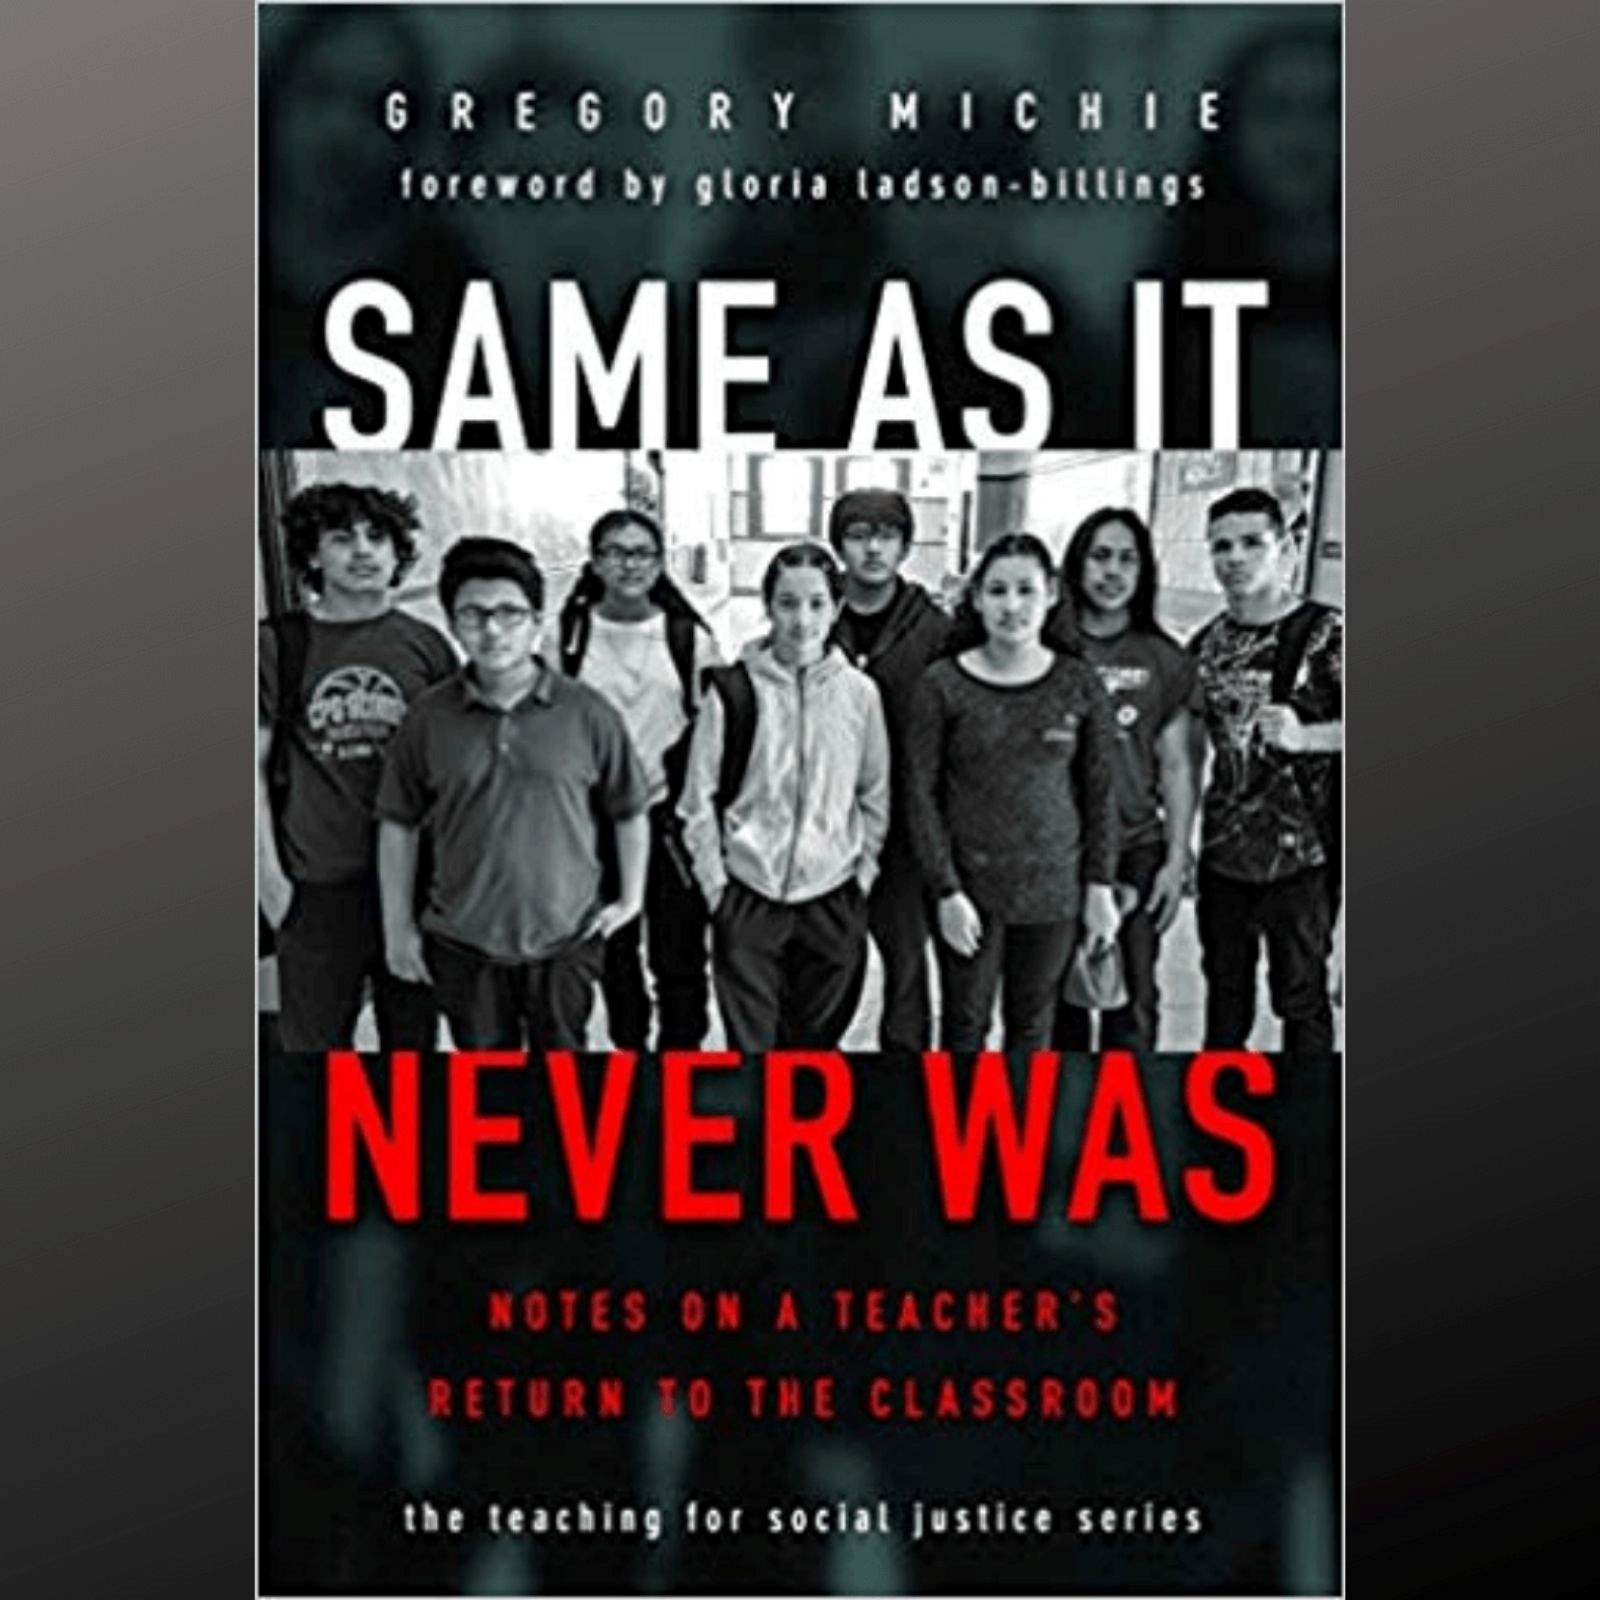 Book Club Preview: Same As It Never Was